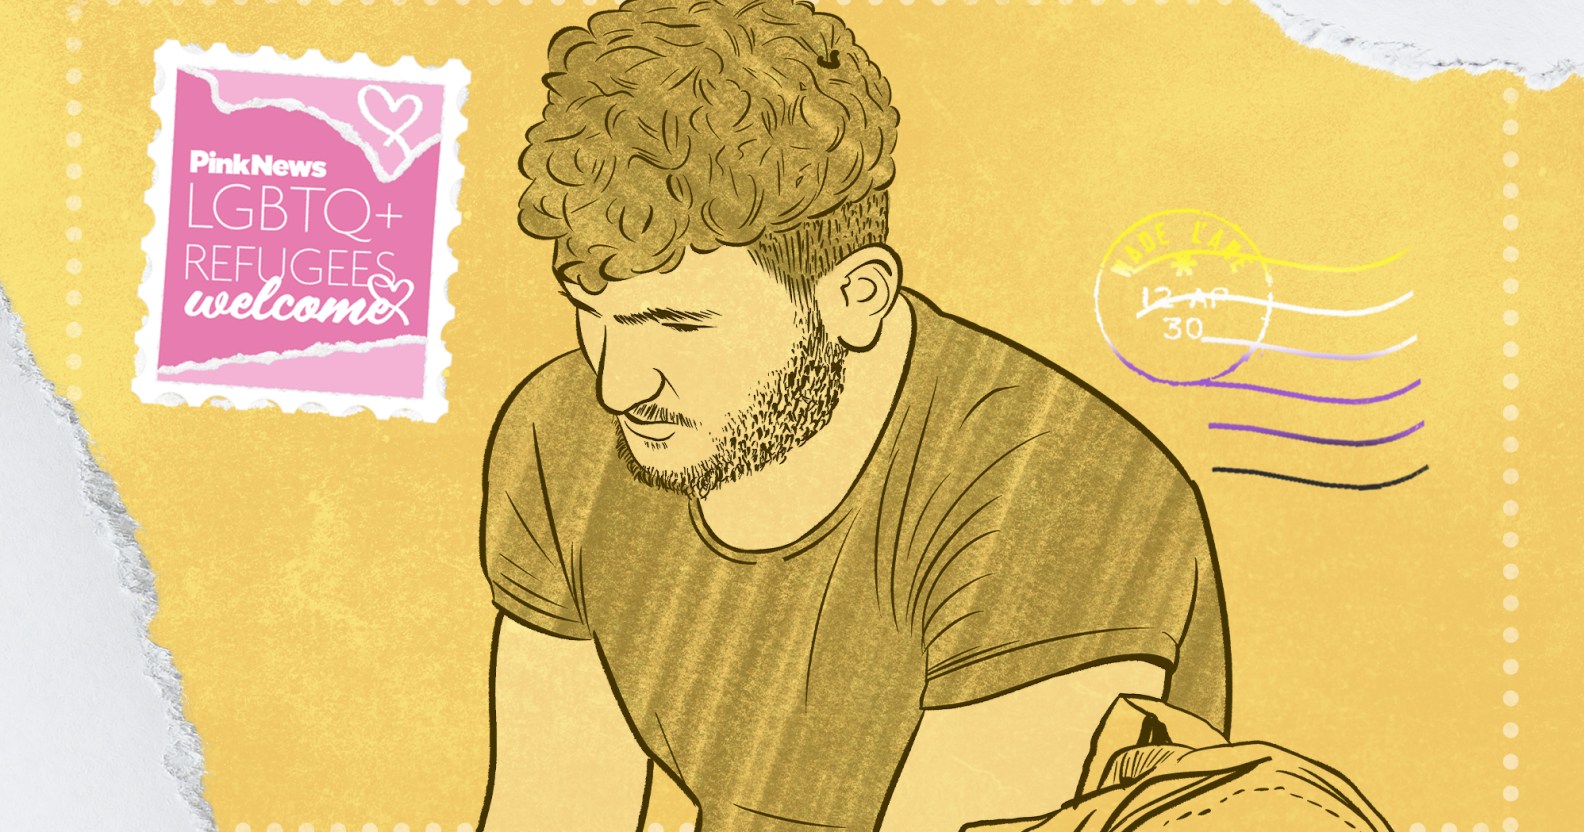 An illustration in yellow showing an emotional Afghan man wearing a t-shirt. The image is illustrated in the design of a postcard, with a stamp in the top left hand corner in pink reading "PinkNews LGBTQ Refugees Welcome".